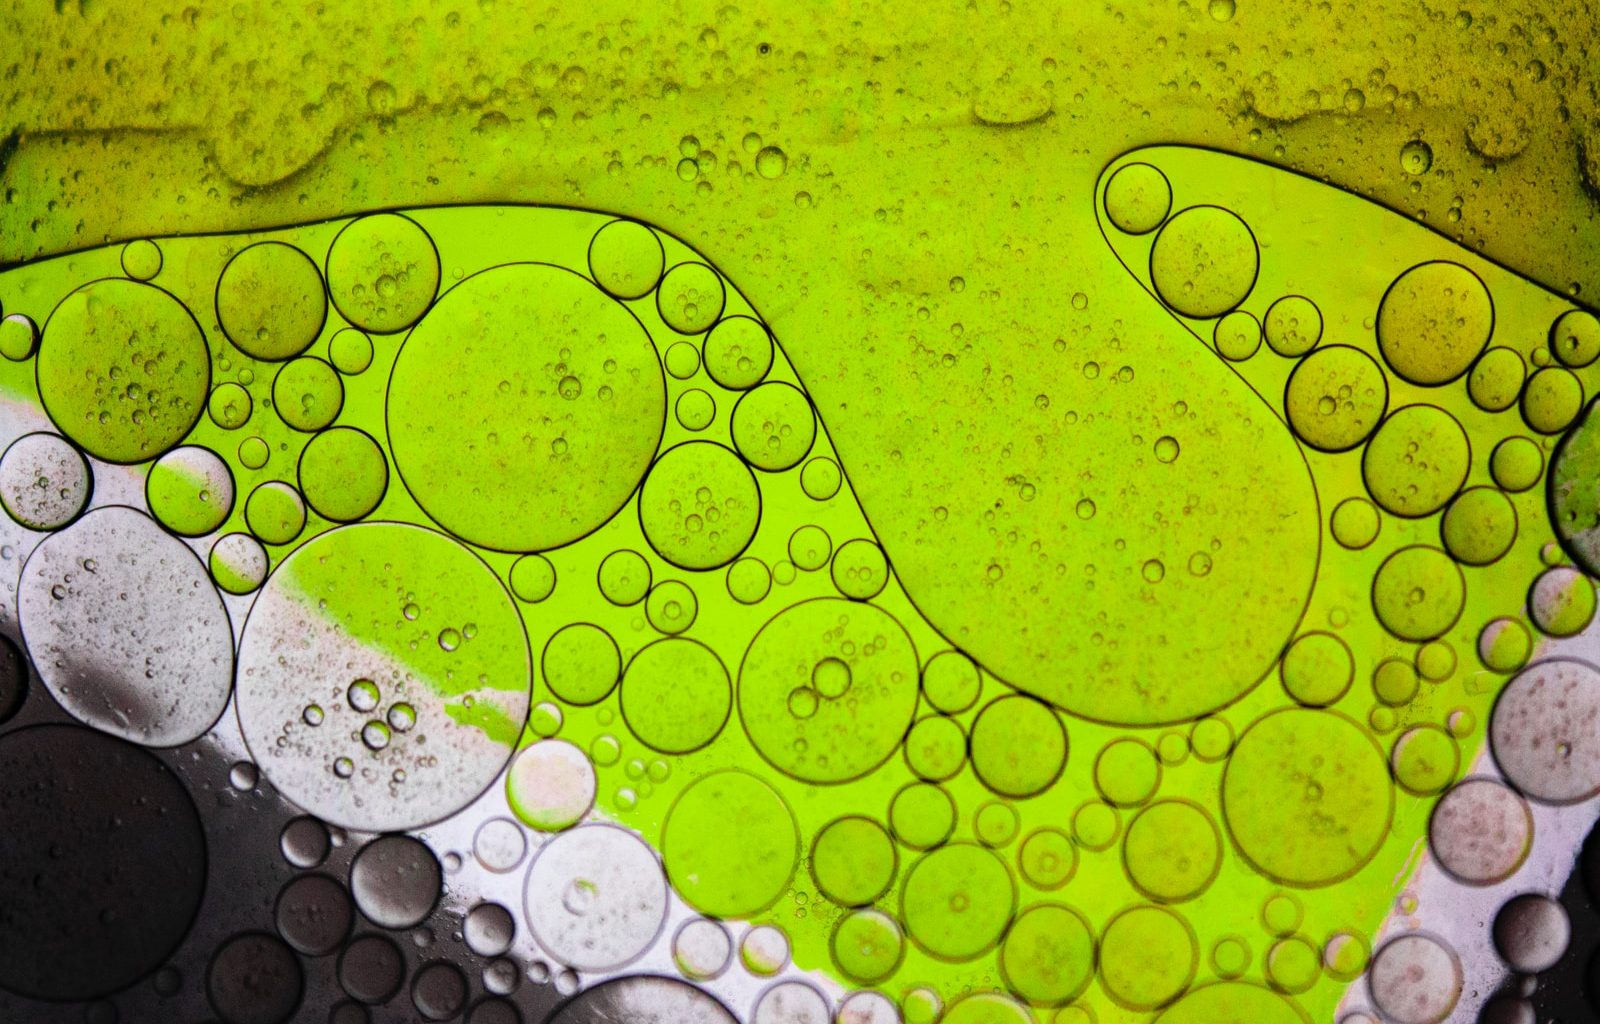 water droplets on green surface